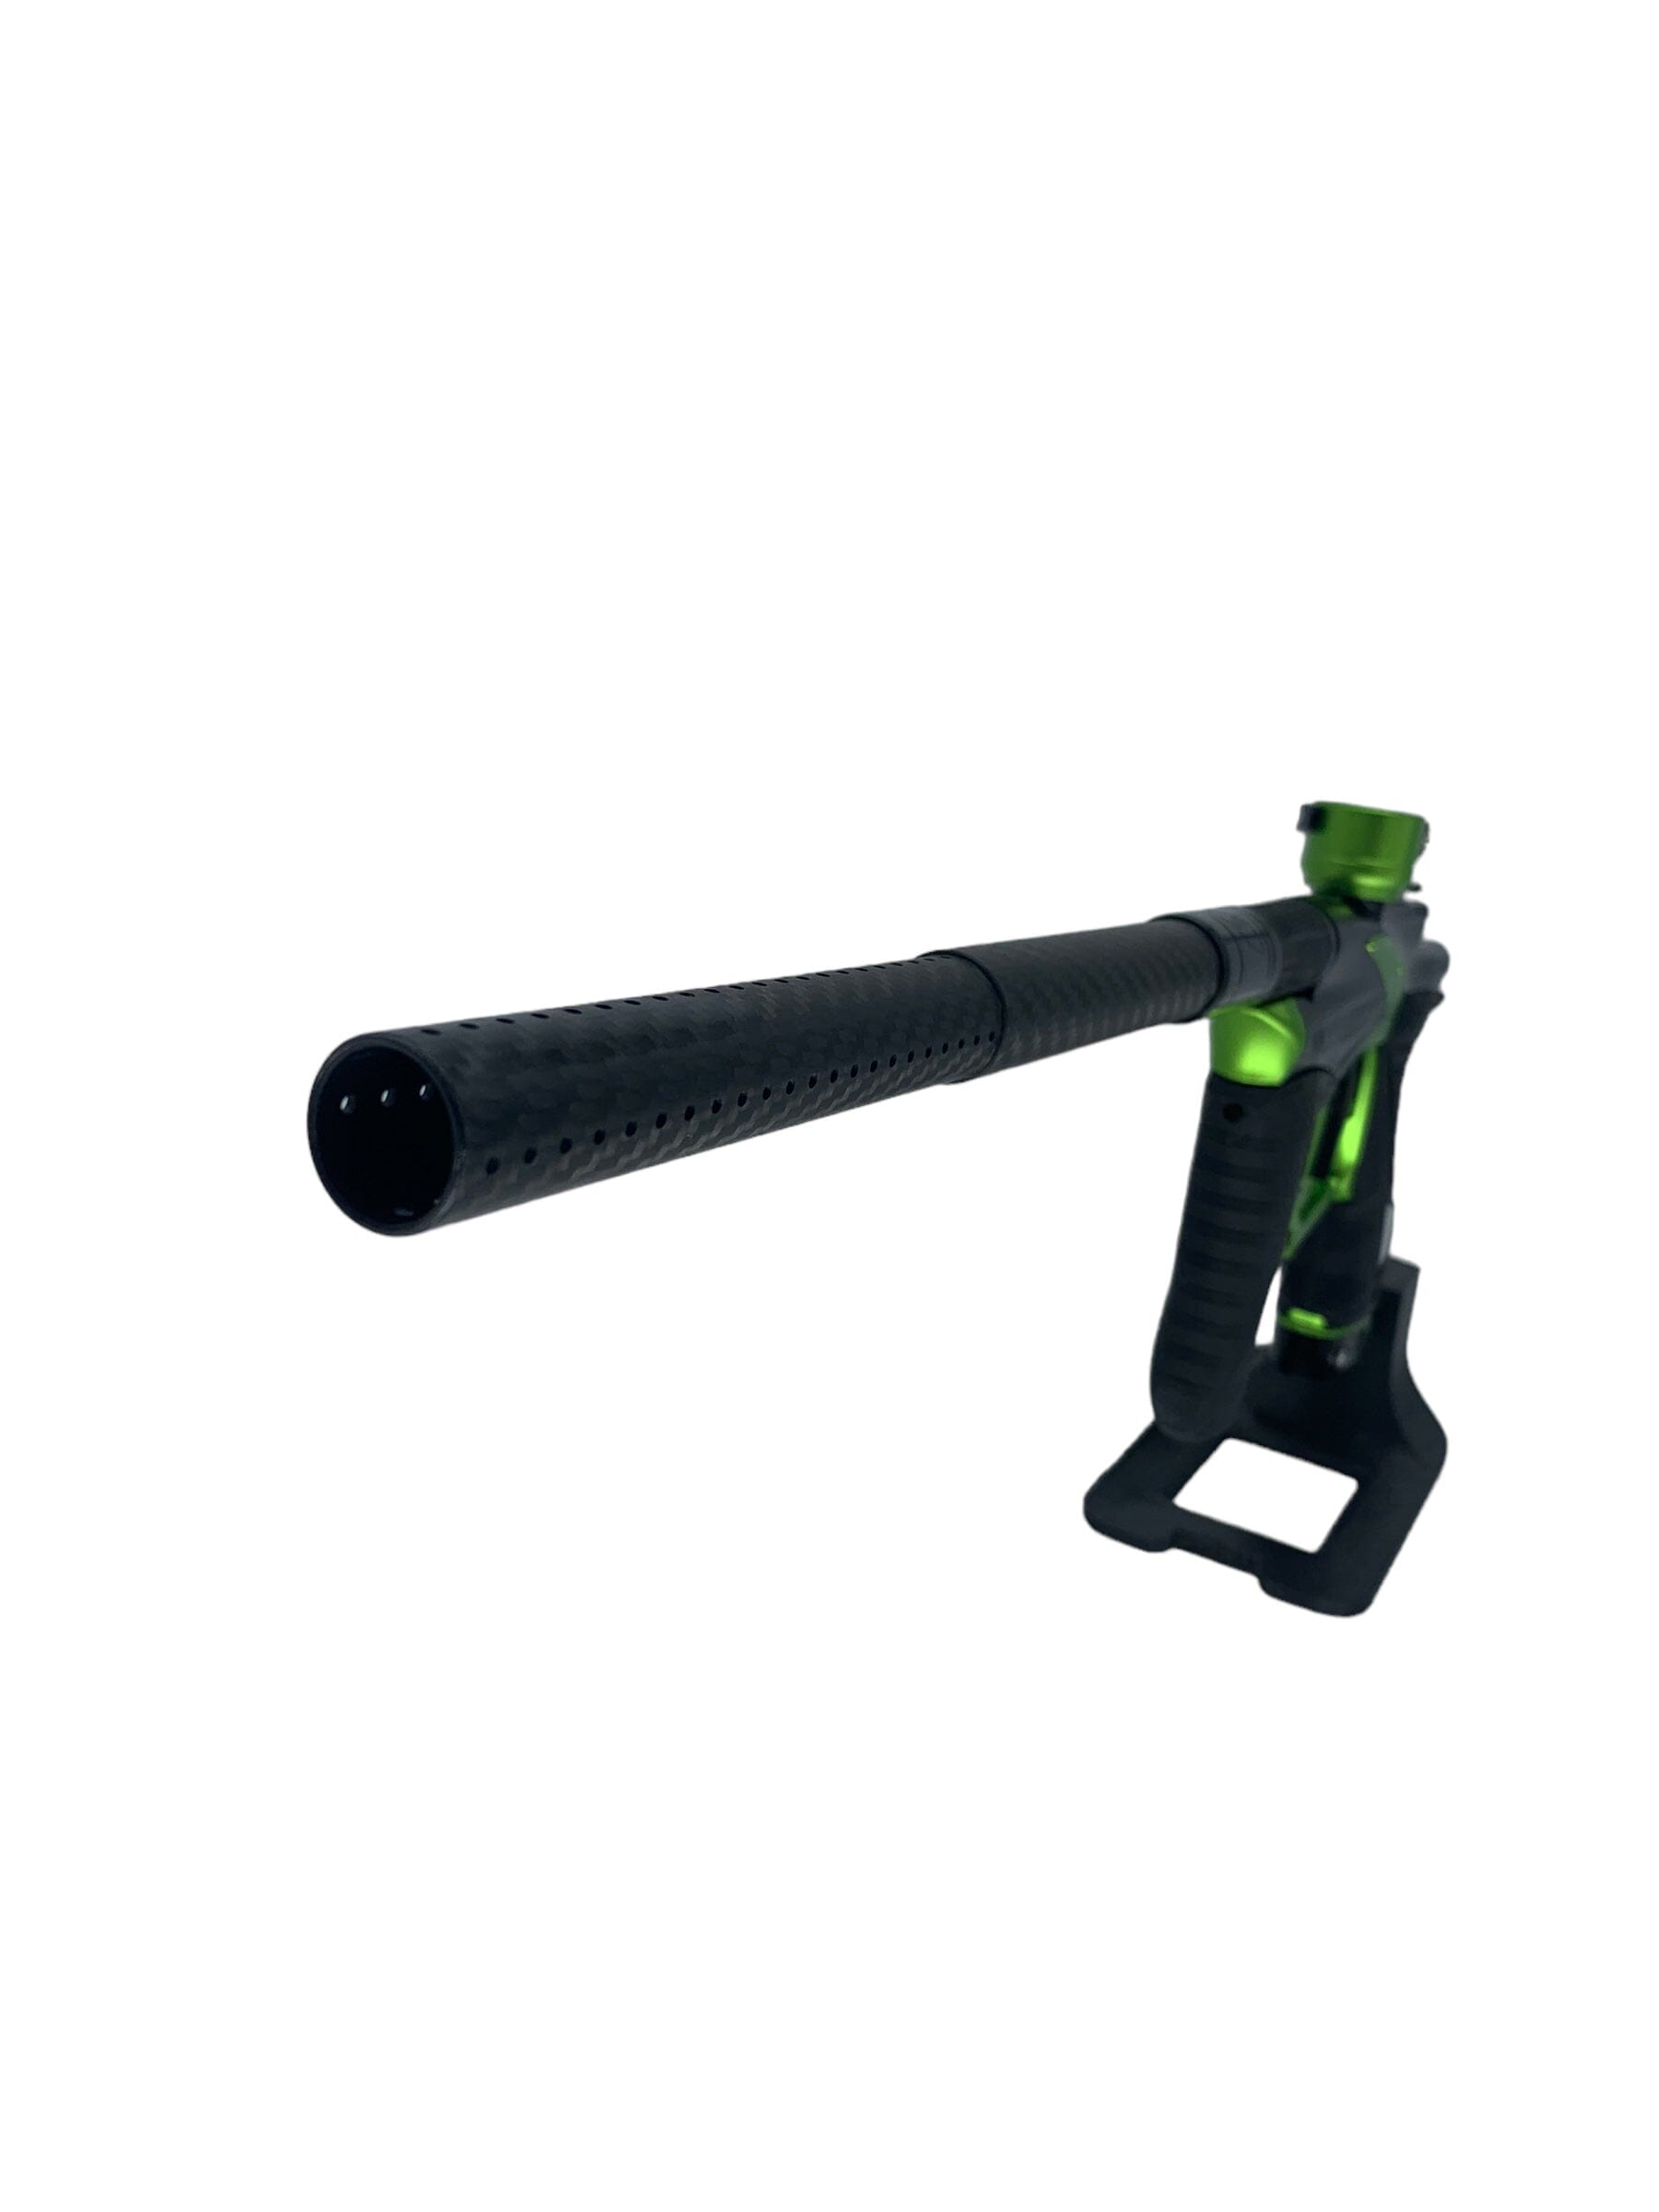 Used Planet Eclipse Lv1.6 Paintball Gun Paintball Gun from CPXBrosPaintball Buy/Sell/Trade Paintball Markers, New Paintball Guns, Paintball Hoppers, Paintball Masks, and Hormesis Headbands